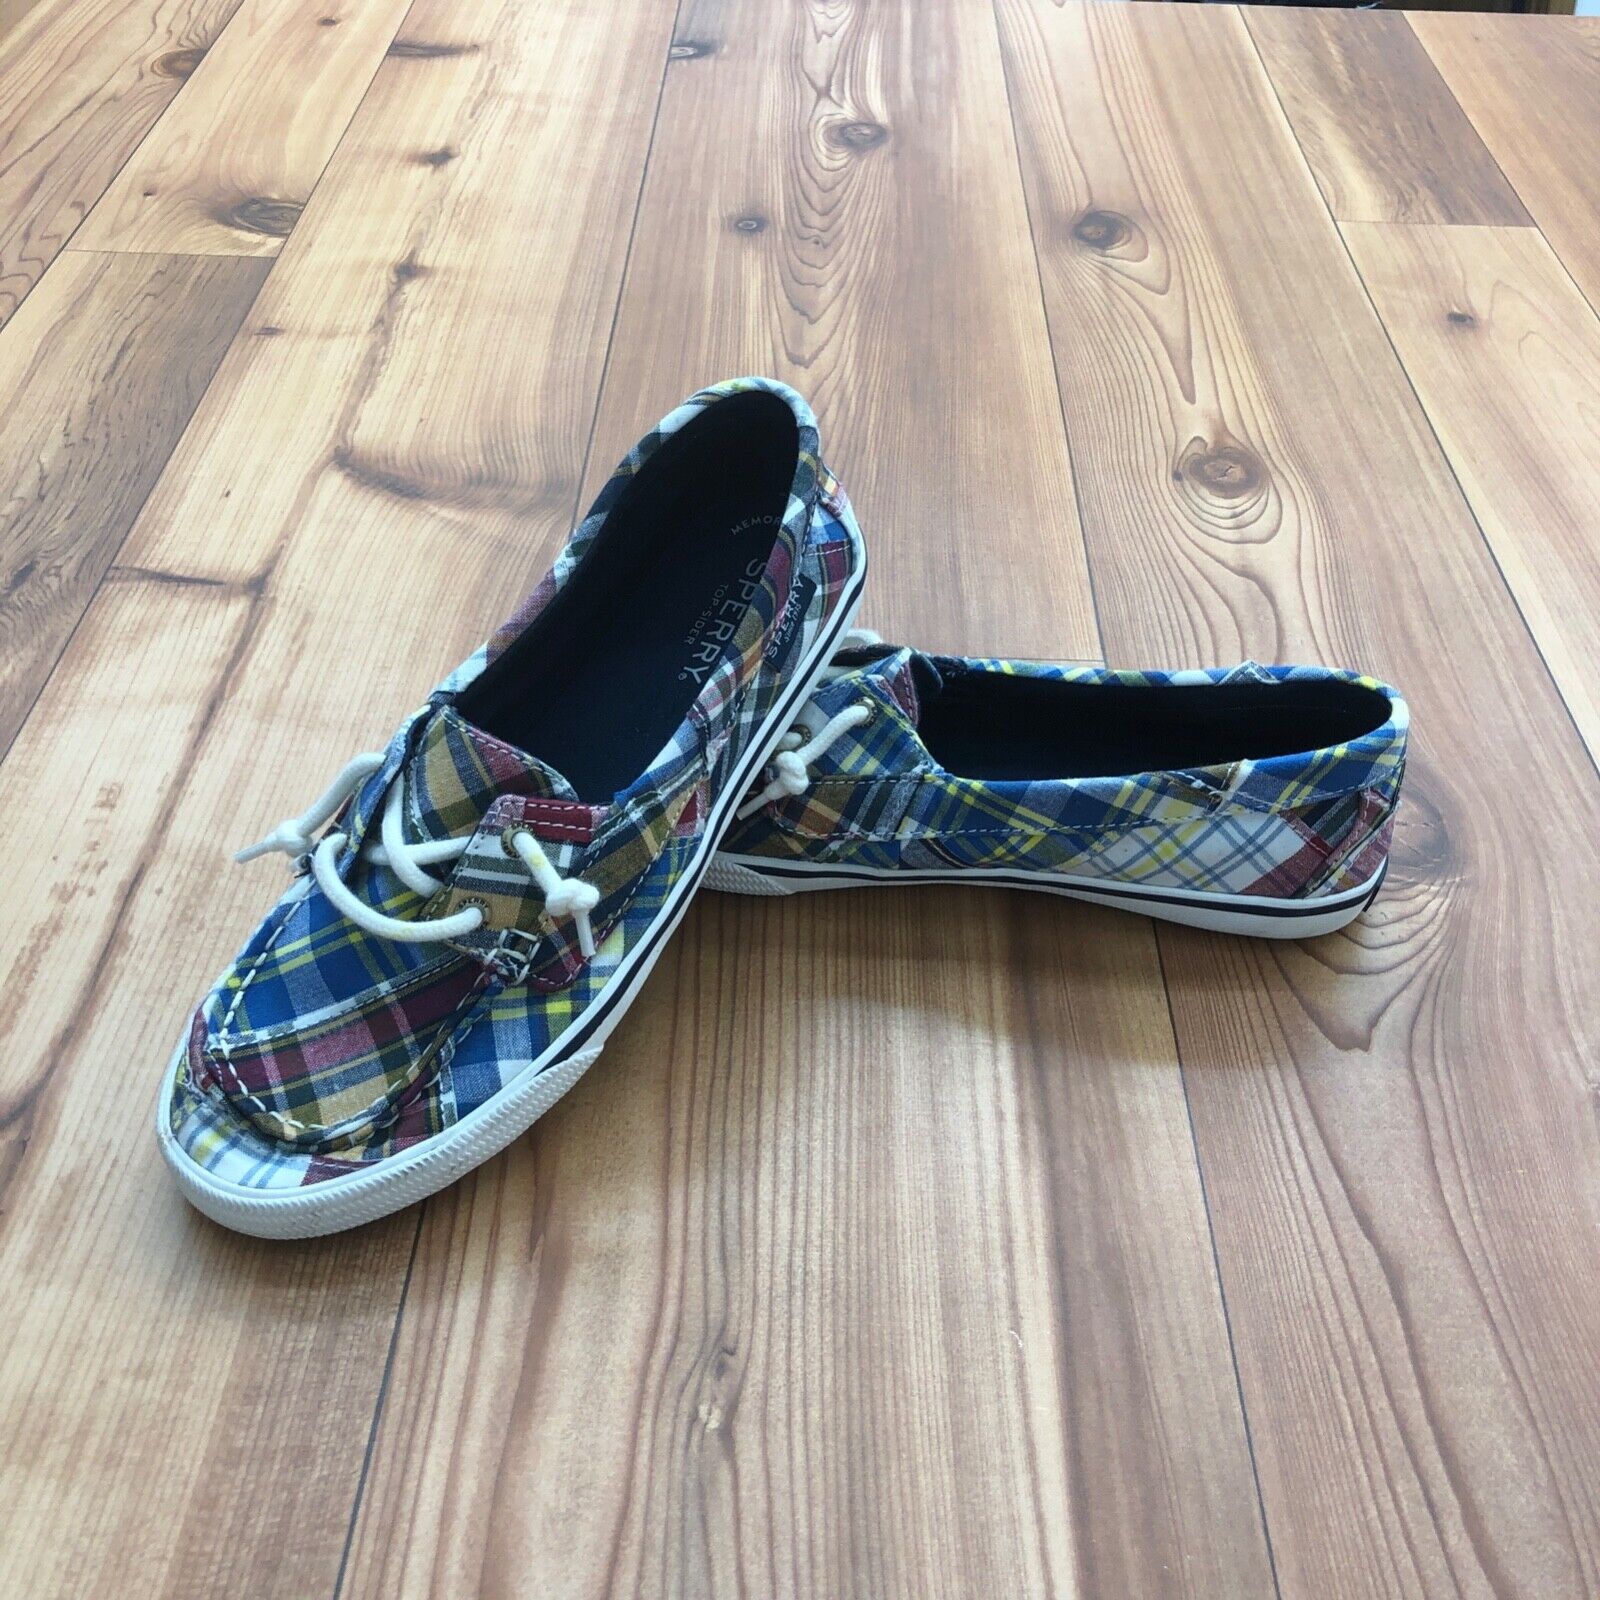 Sperry Top Sider Multicolor Plaid Memory Foam Laces Boat Shoes Women's Size 6